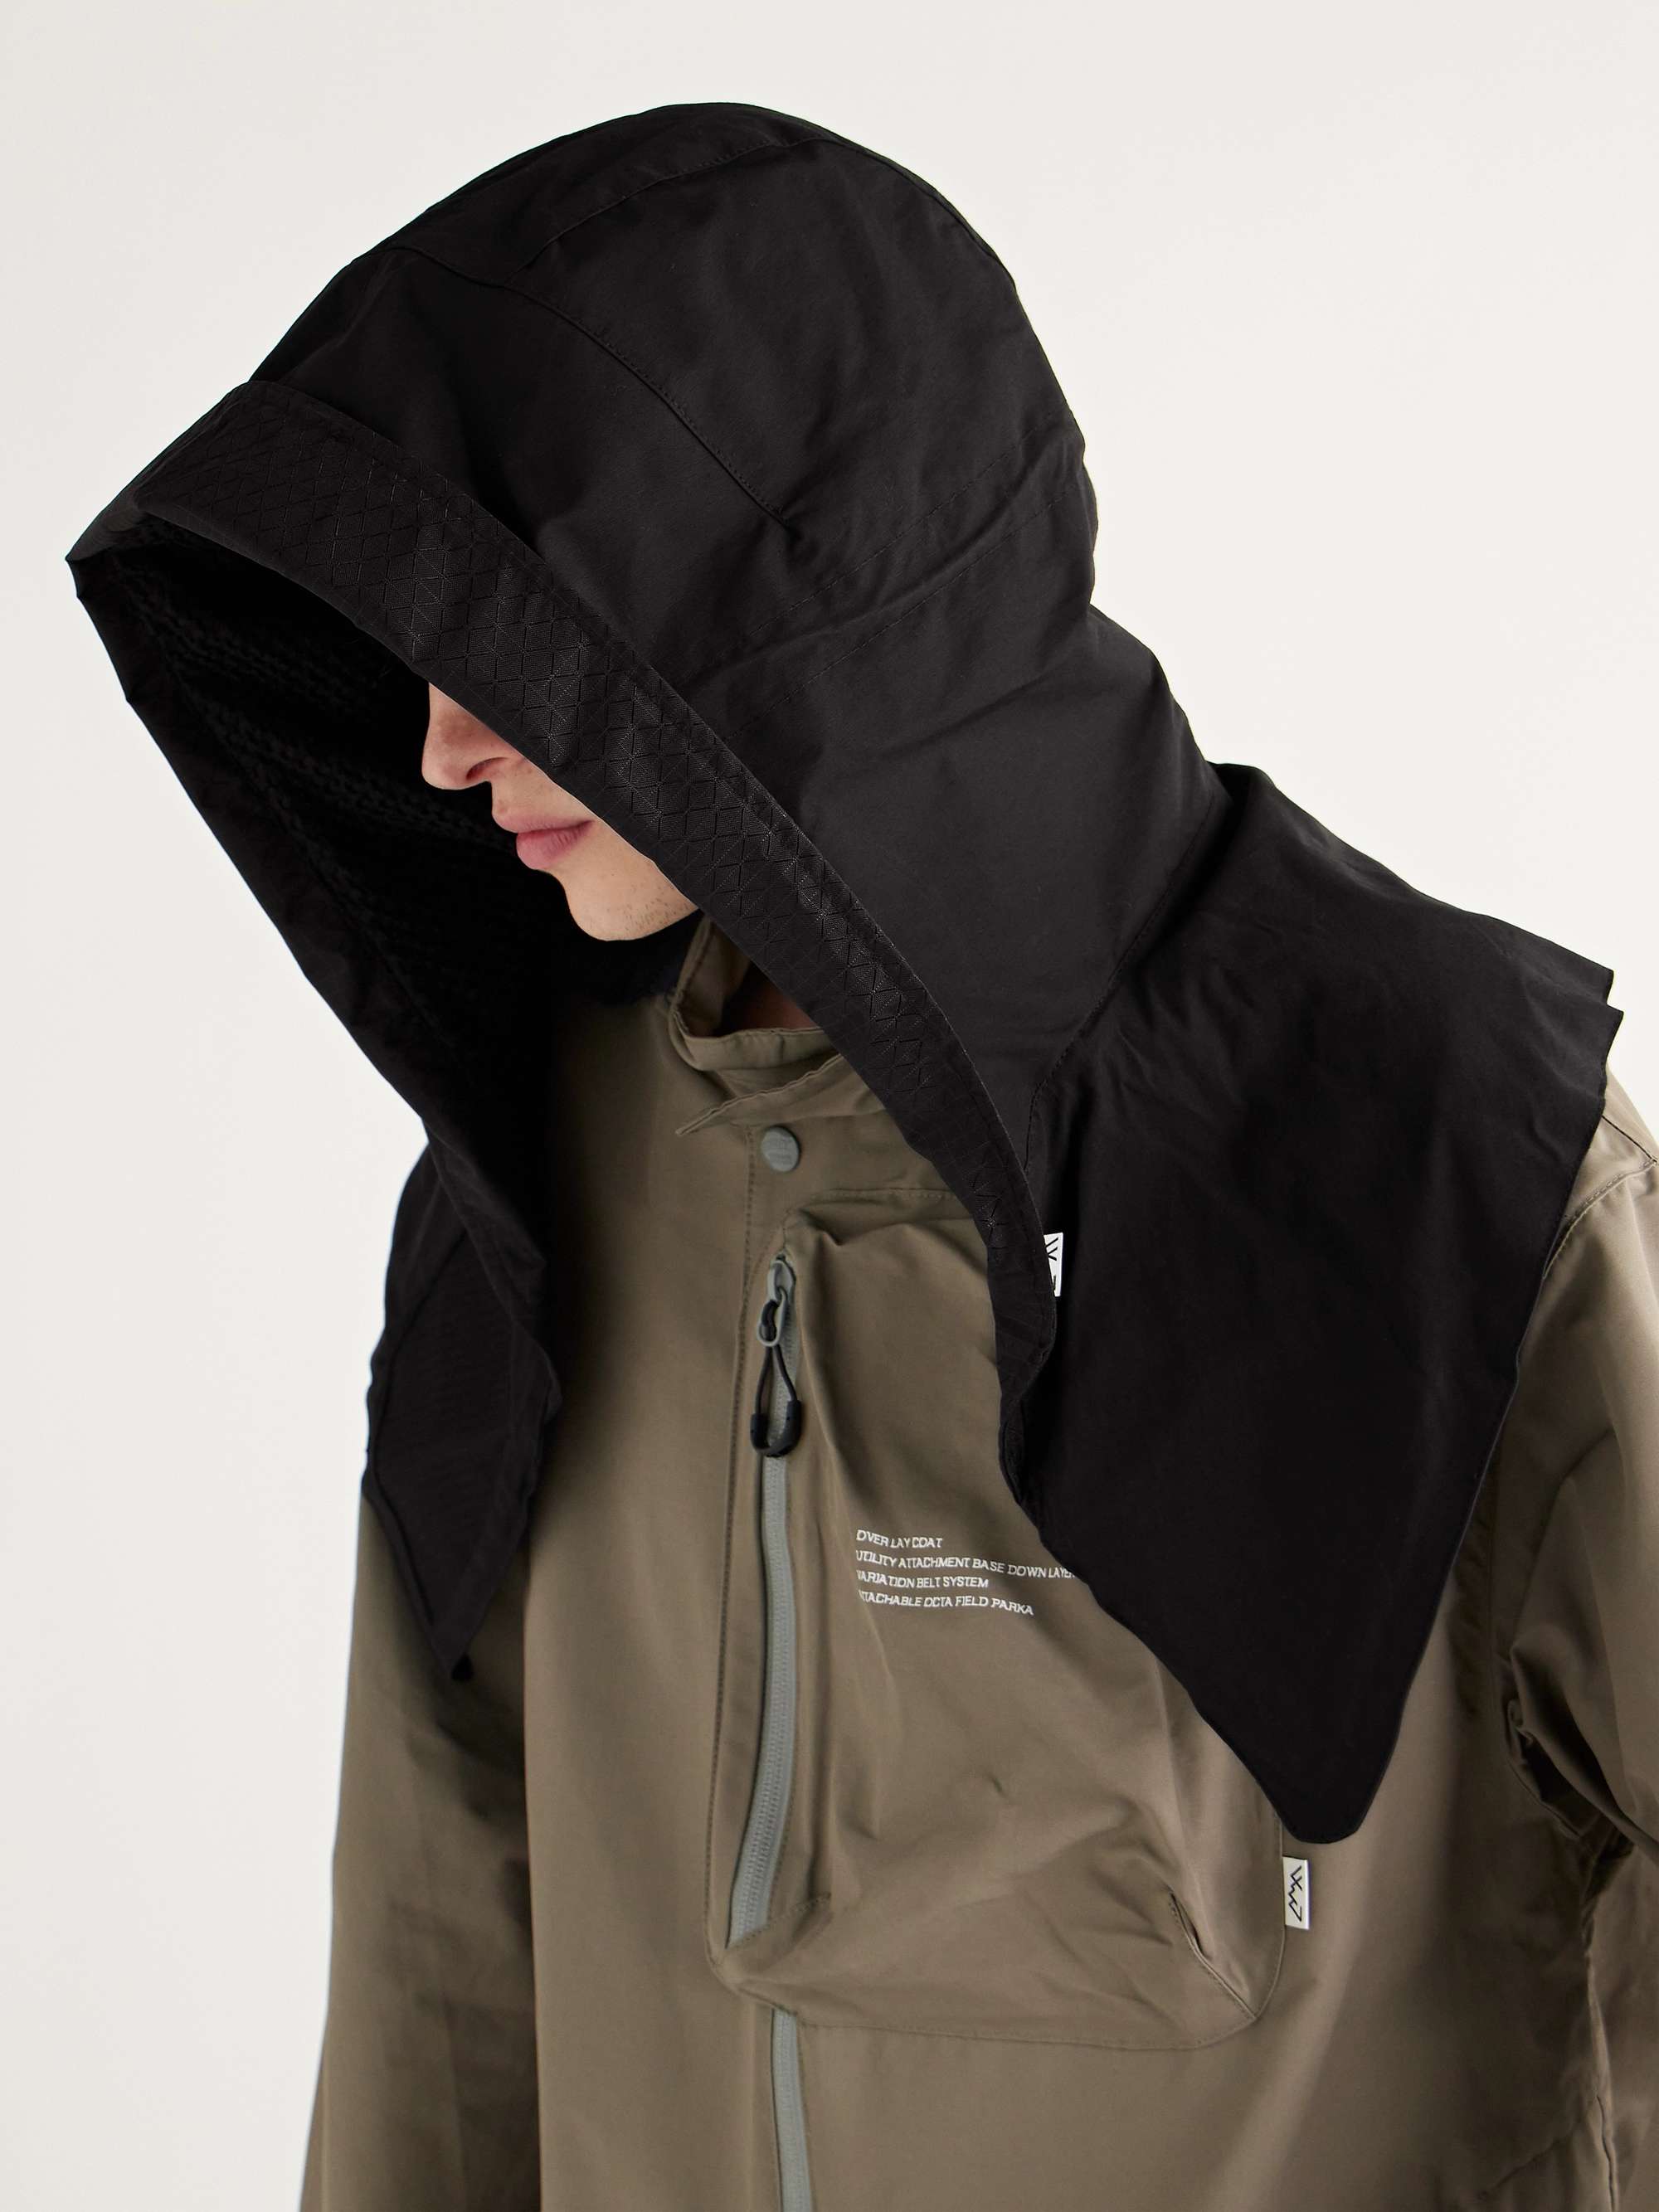 COMFY OUTDOOR GARMENT Shell, Ripstop and Mesh Hood